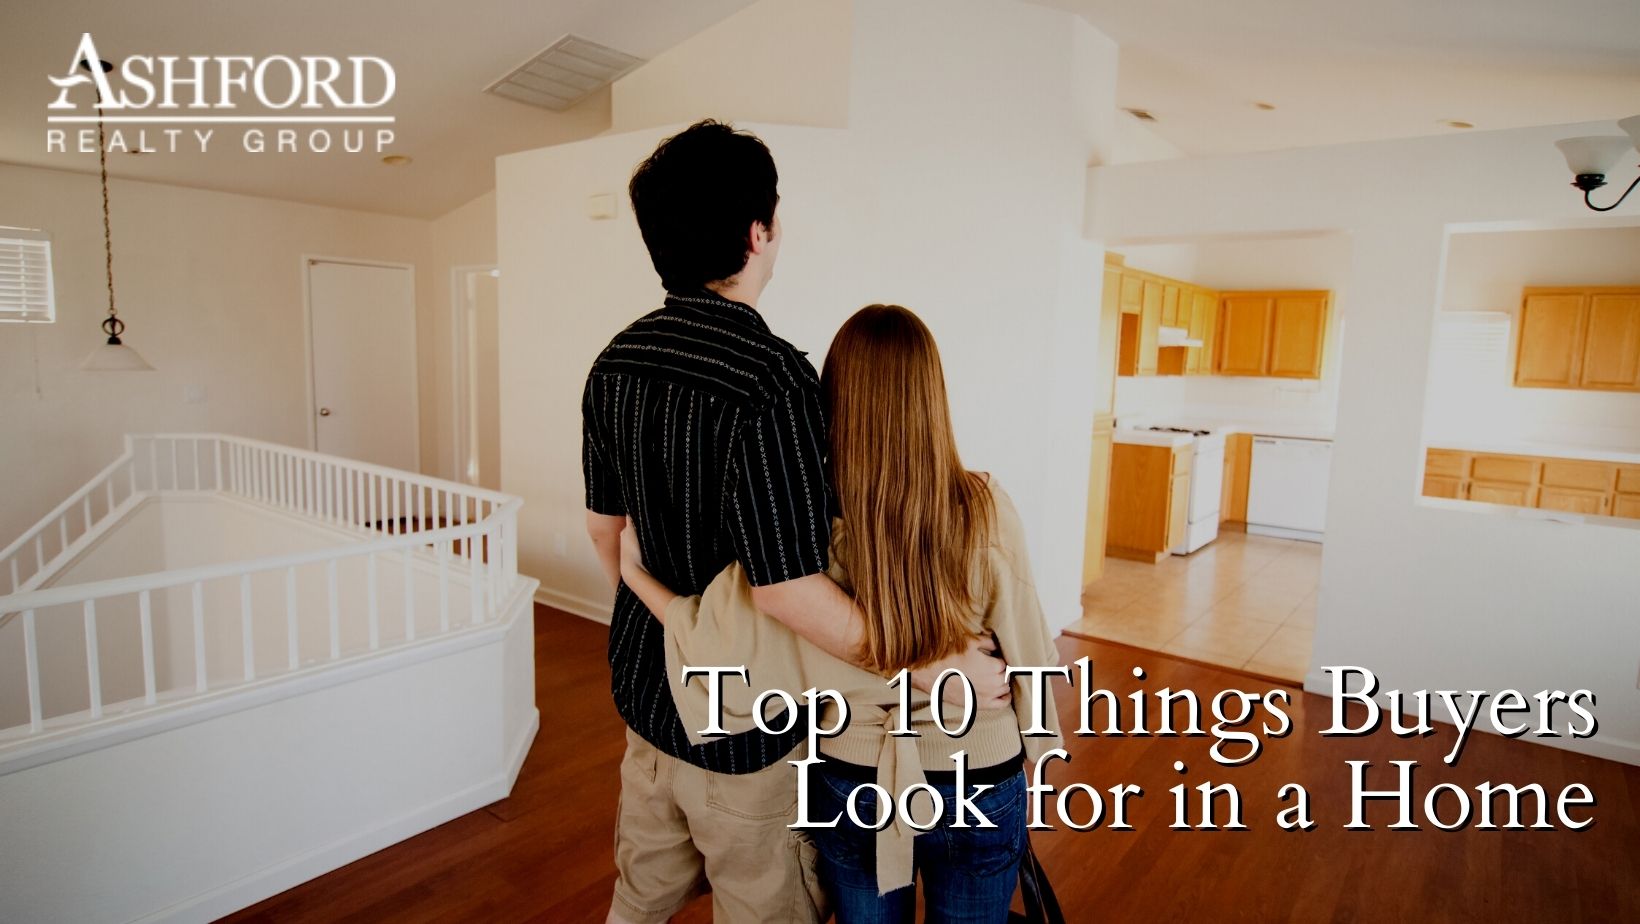 Top 10 Things Buyers Look for in a Home